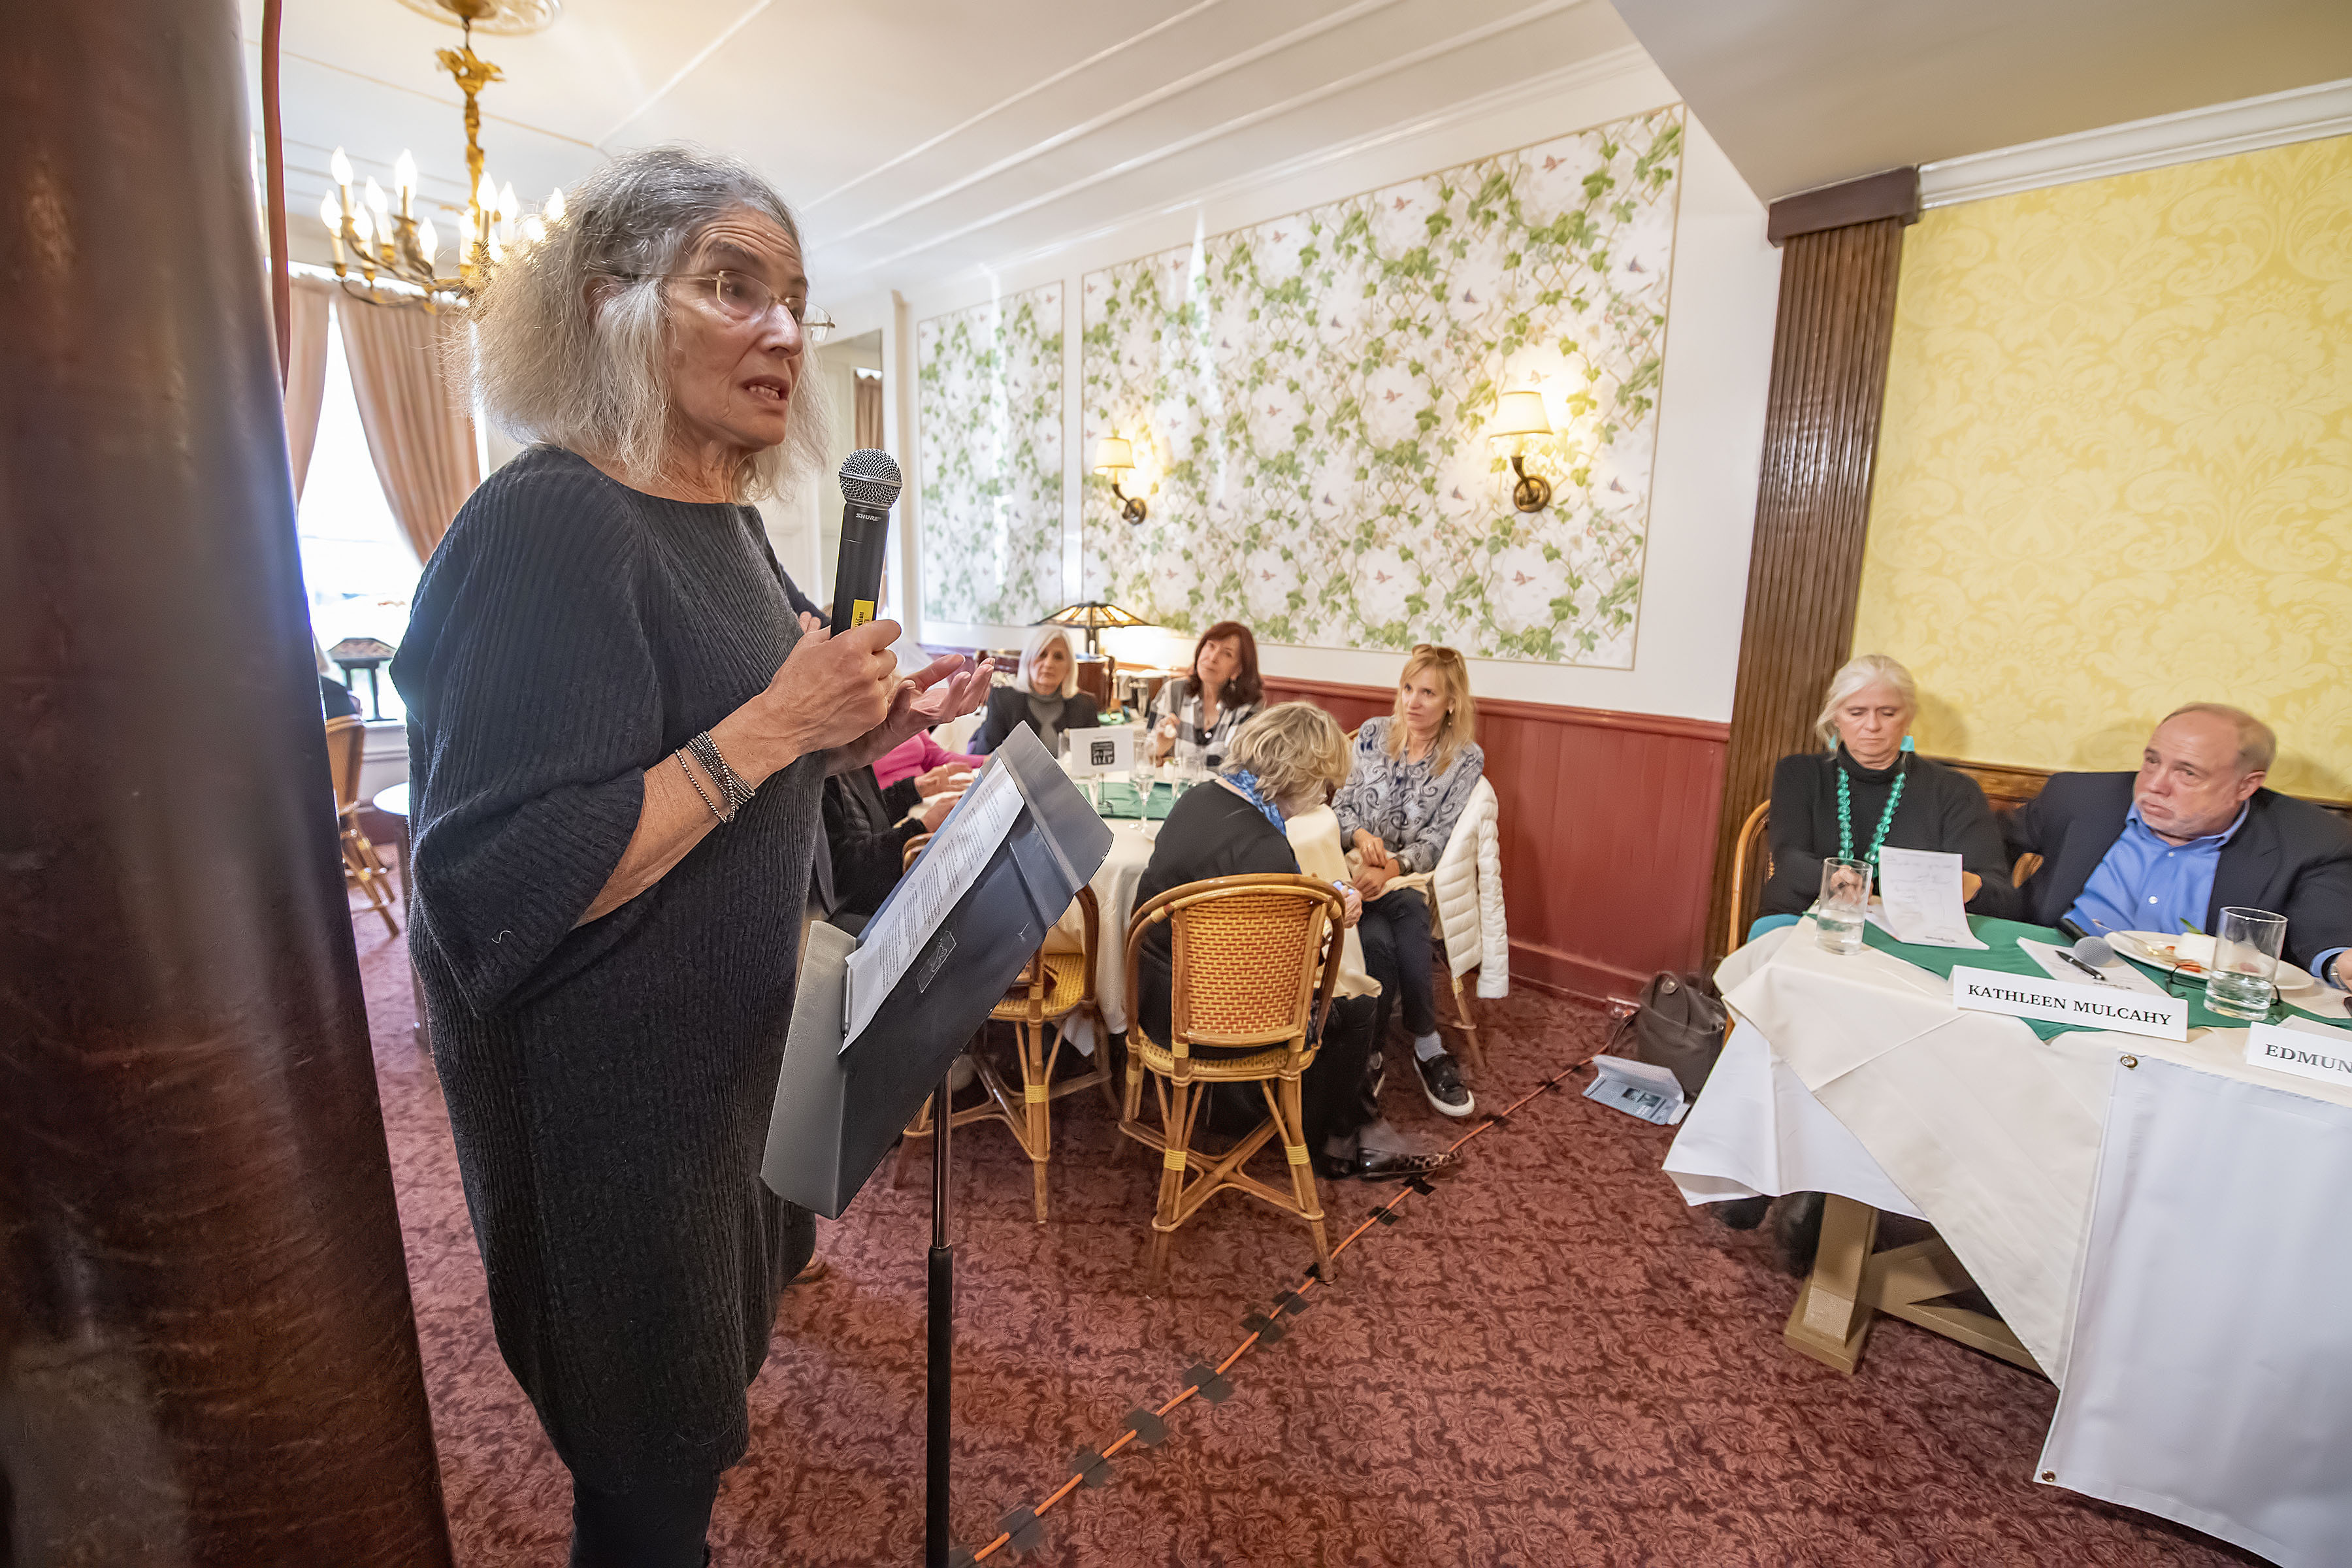 An attendee poses a question to the panel during the Express Sessions - Sag Harbor Public Spaces event at the American Hotel in Sag Harbor on Friday.  MICHAEL HELLER